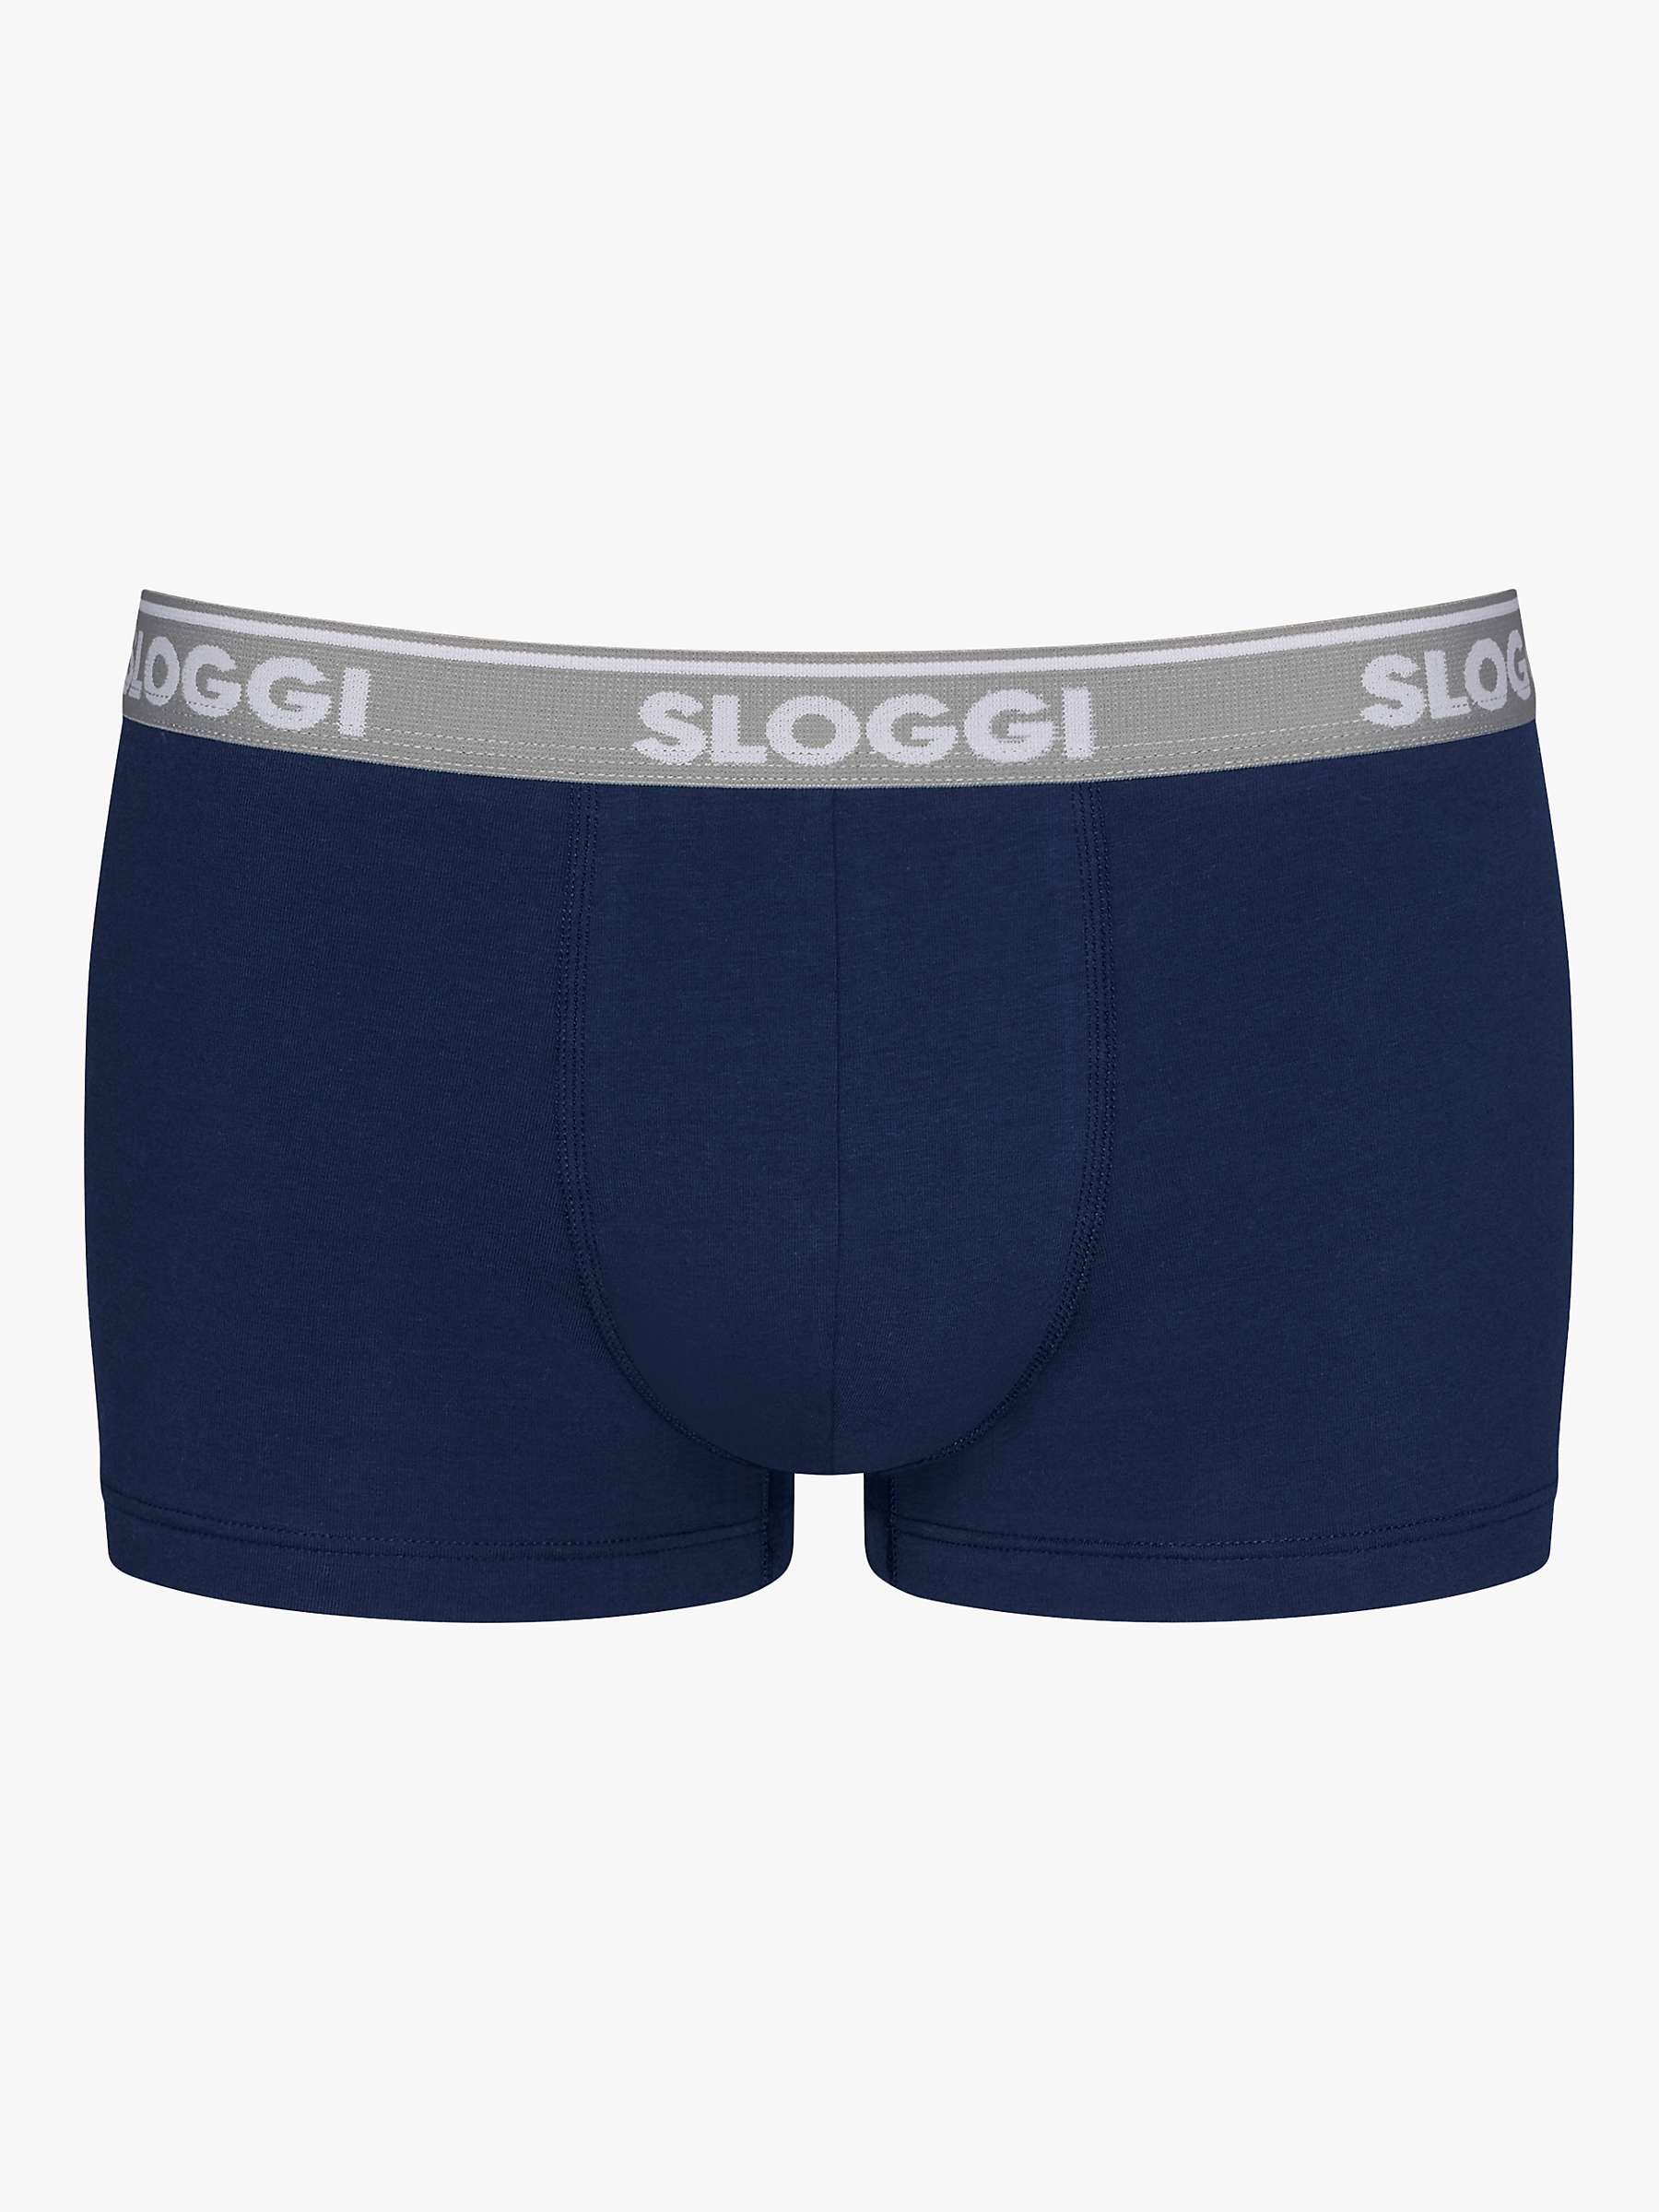 Buy sloggi GO ABC Cotton Stretch Hipster Trunks, Pack of 2, Grey Online at johnlewis.com